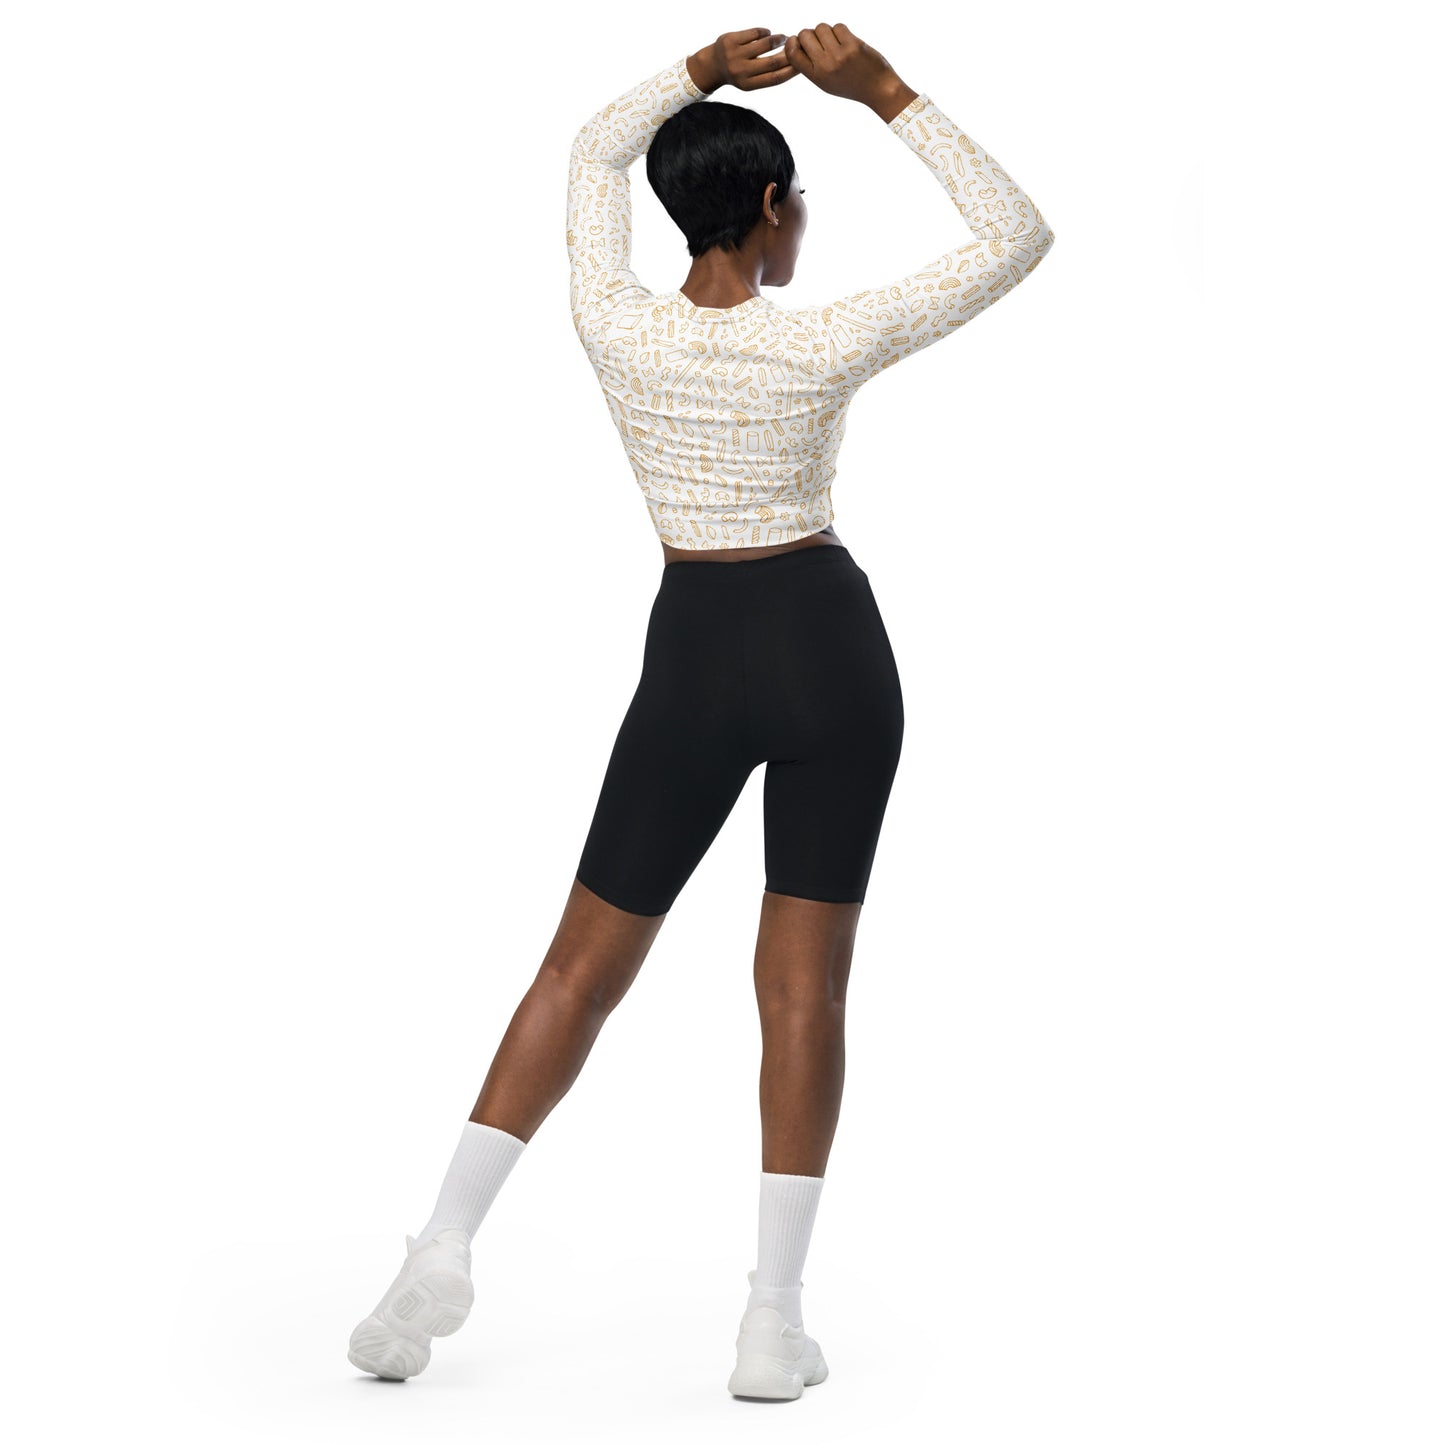 Noodle Recycled long-sleeve crop top